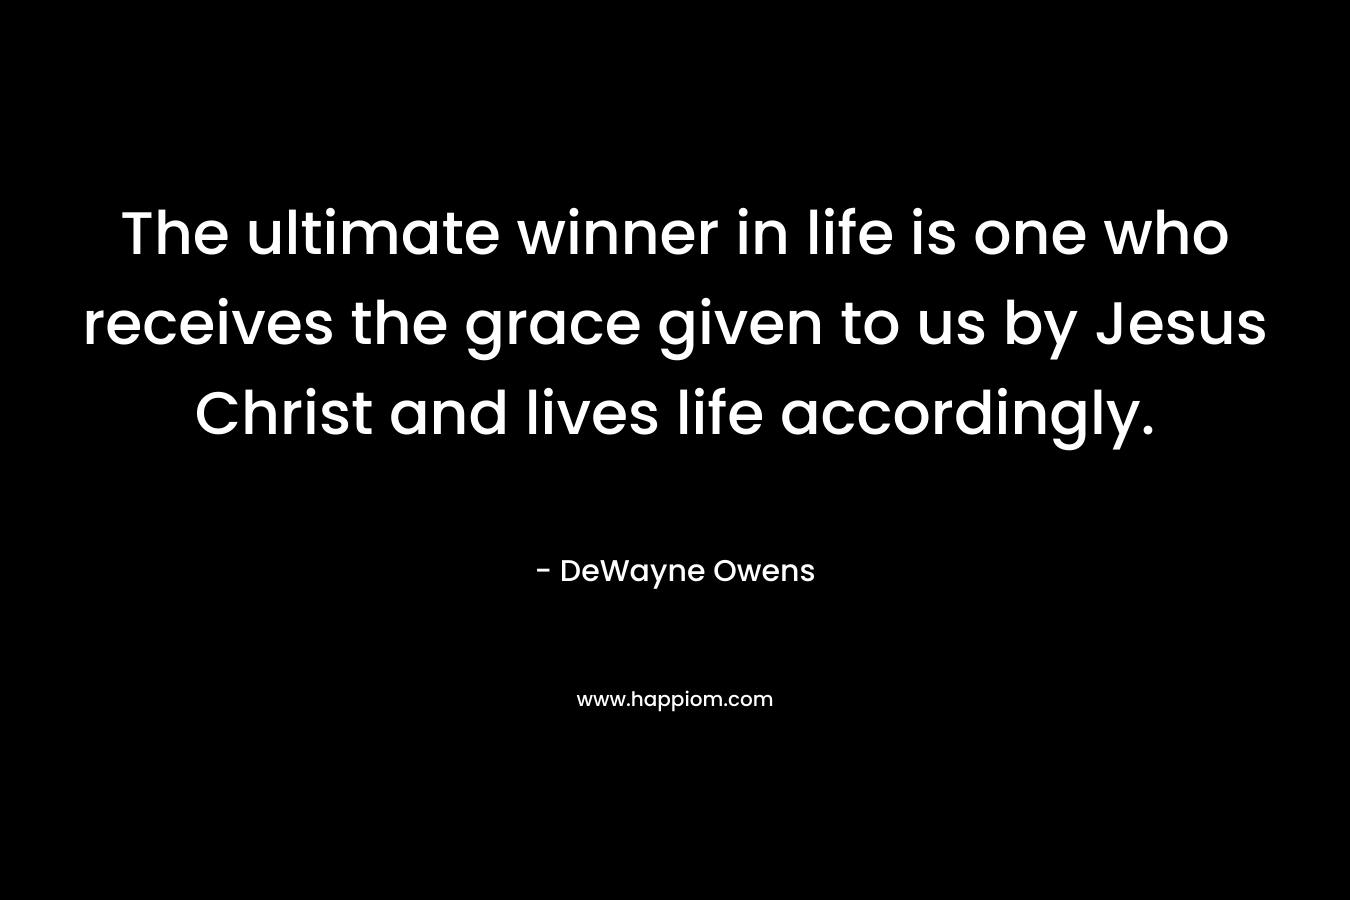 The ultimate winner in life is one who receives the grace given to us by Jesus Christ and lives life accordingly. – DeWayne Owens